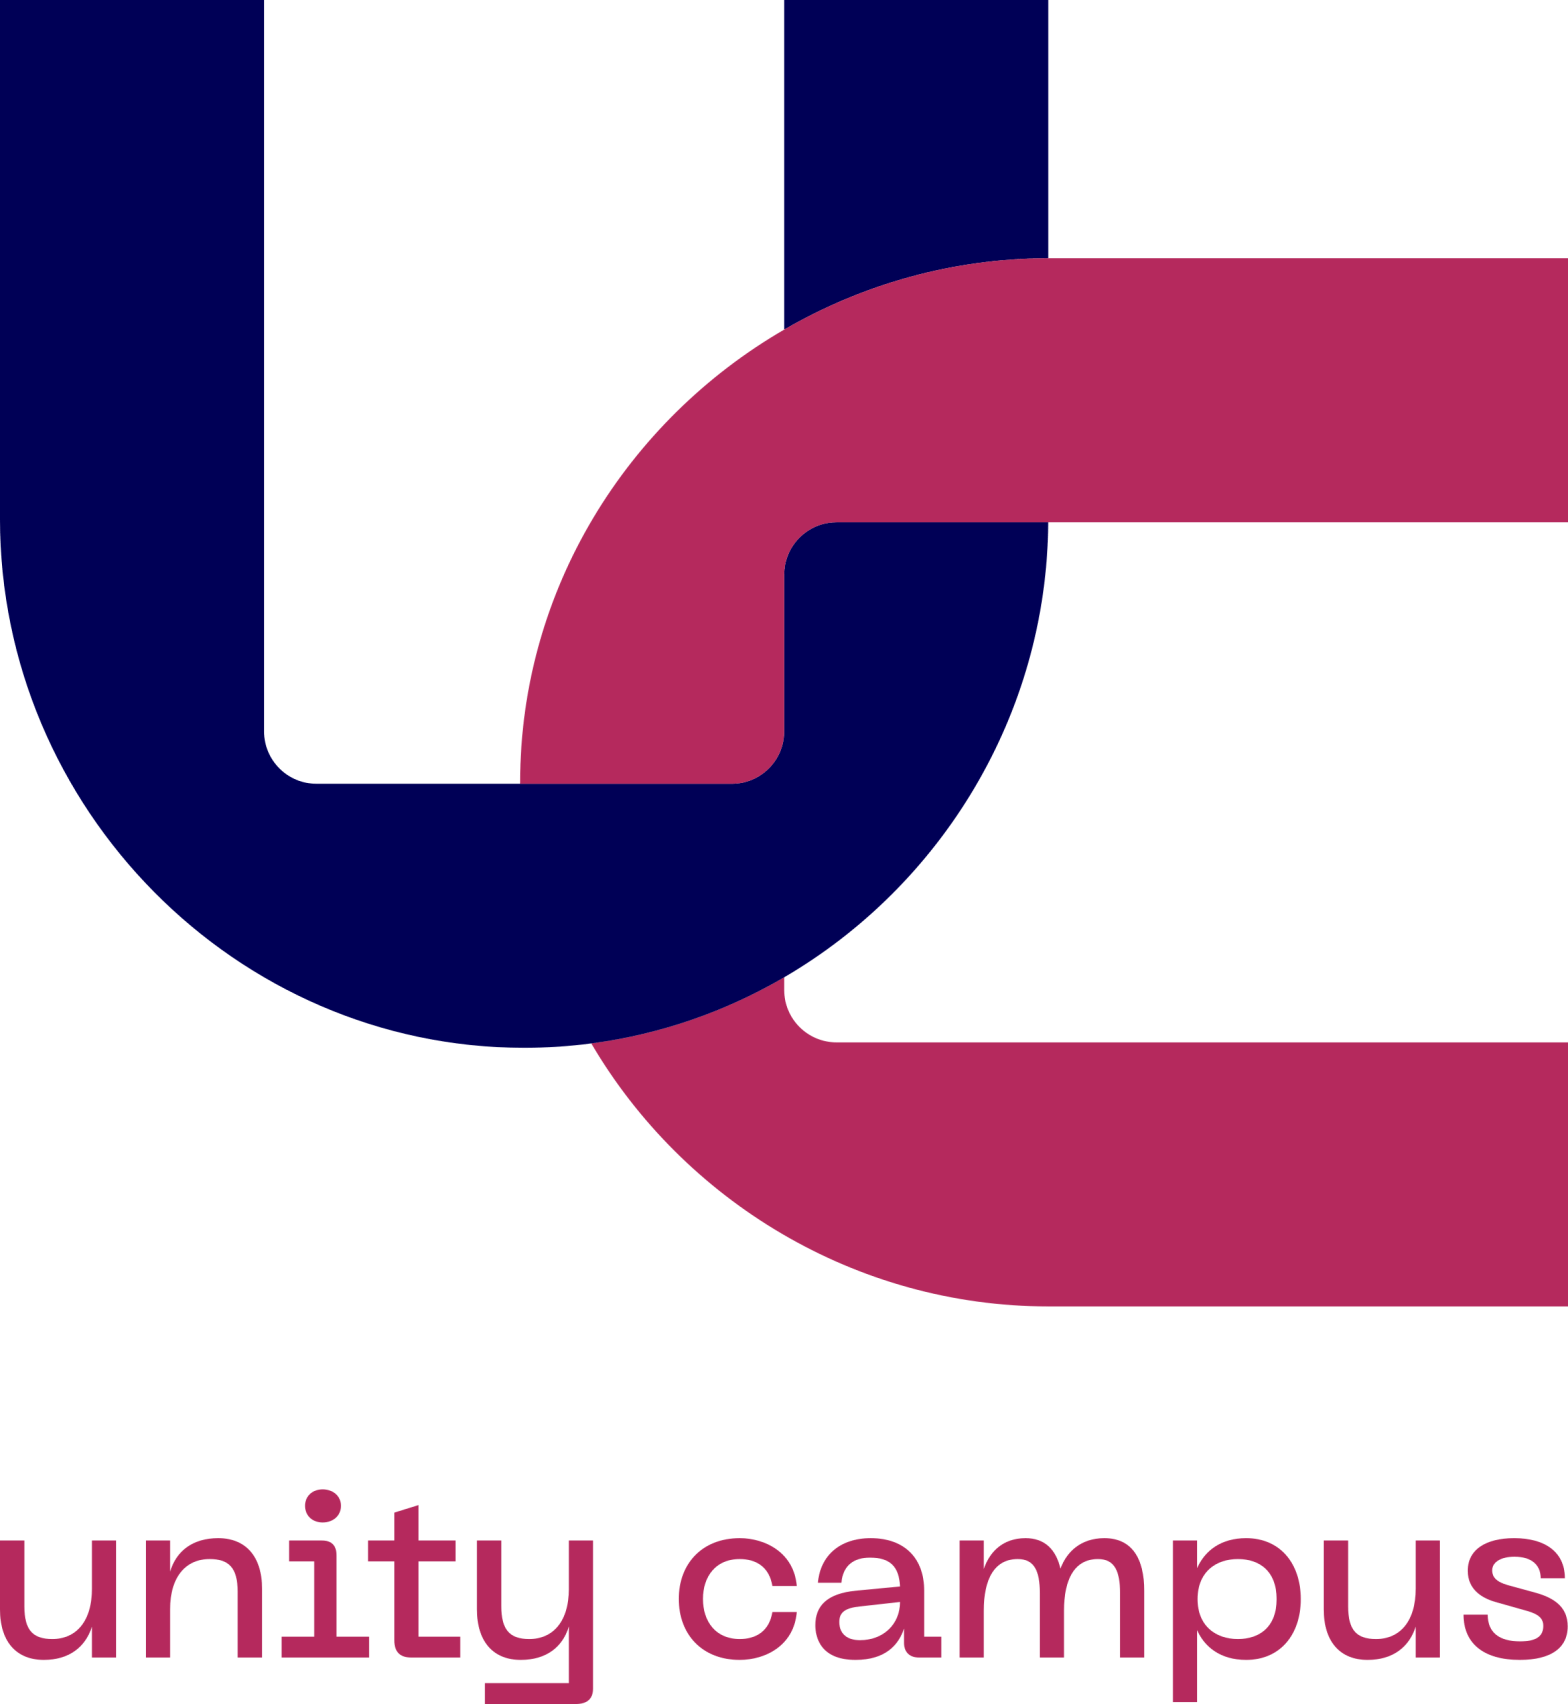 https://cambridgewideopenday.com/wp-content/uploads/2023/03/Unity-Campus_Masterbrand-Logo_RGB_Navy_Pink-1568x1704.png